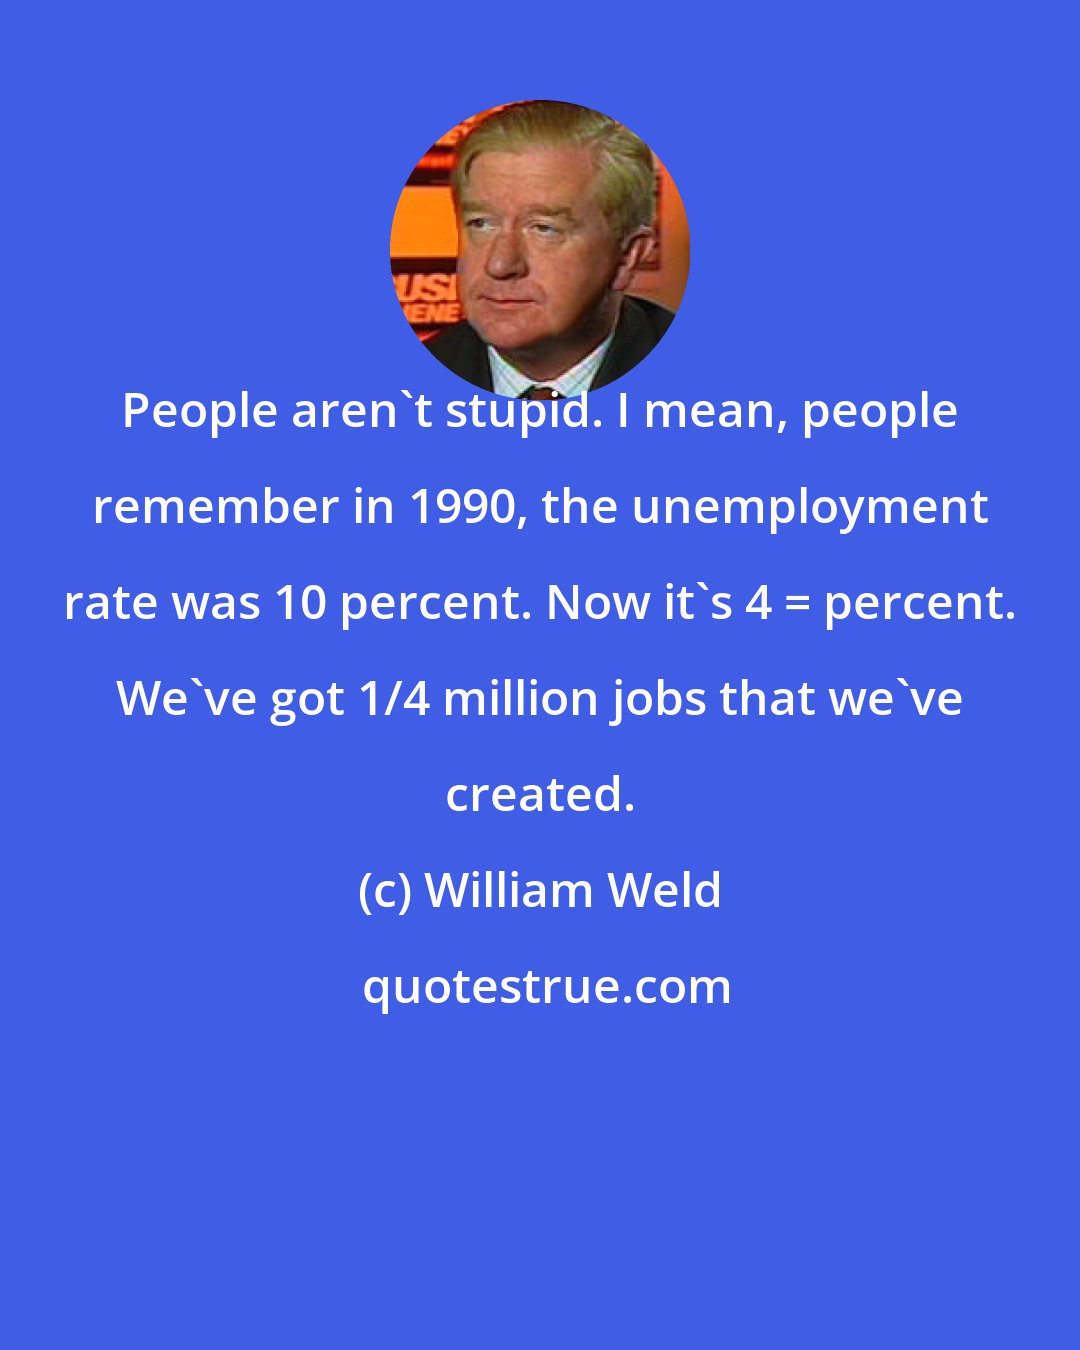 William Weld: People aren't stupid. I mean, people remember in 1990, the unemployment rate was 10 percent. Now it's 4 _ percent. We've got 1/4 million jobs that we've created.